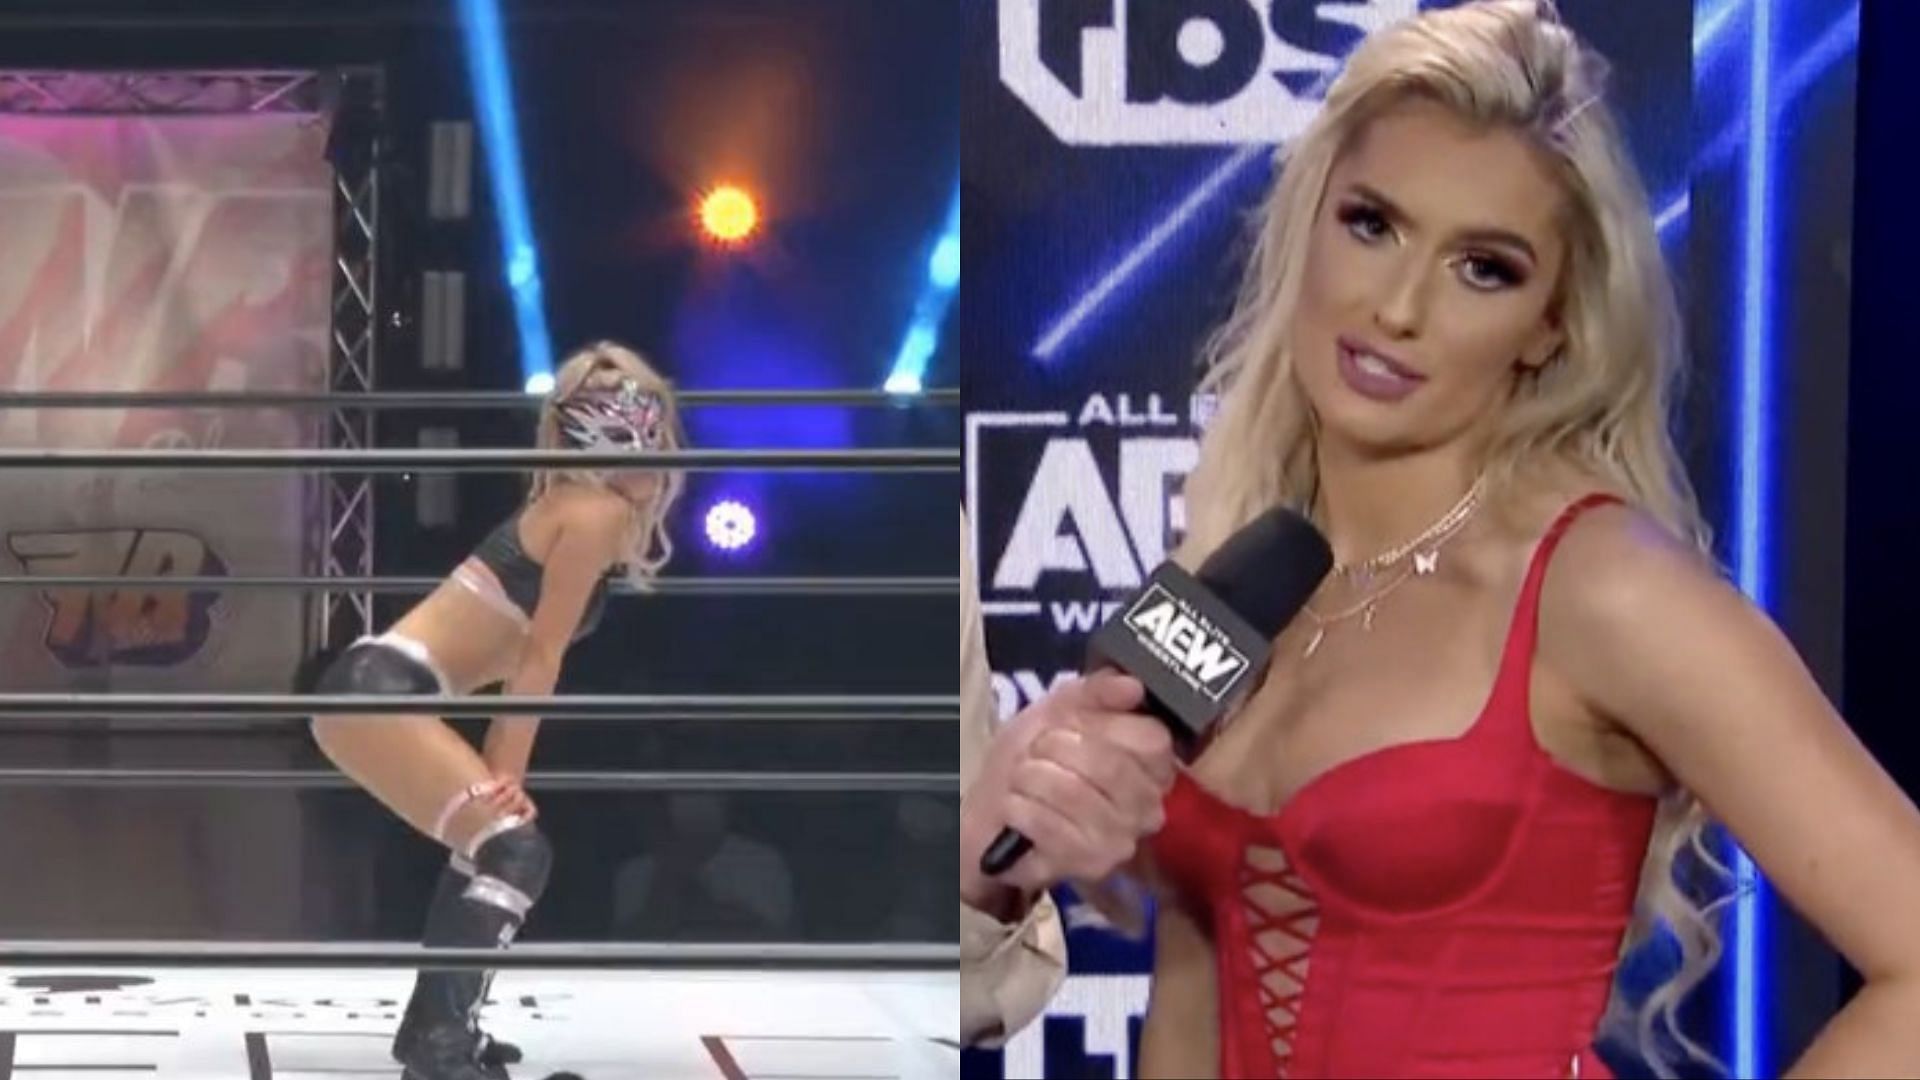 Mariah May recently signed with AEW